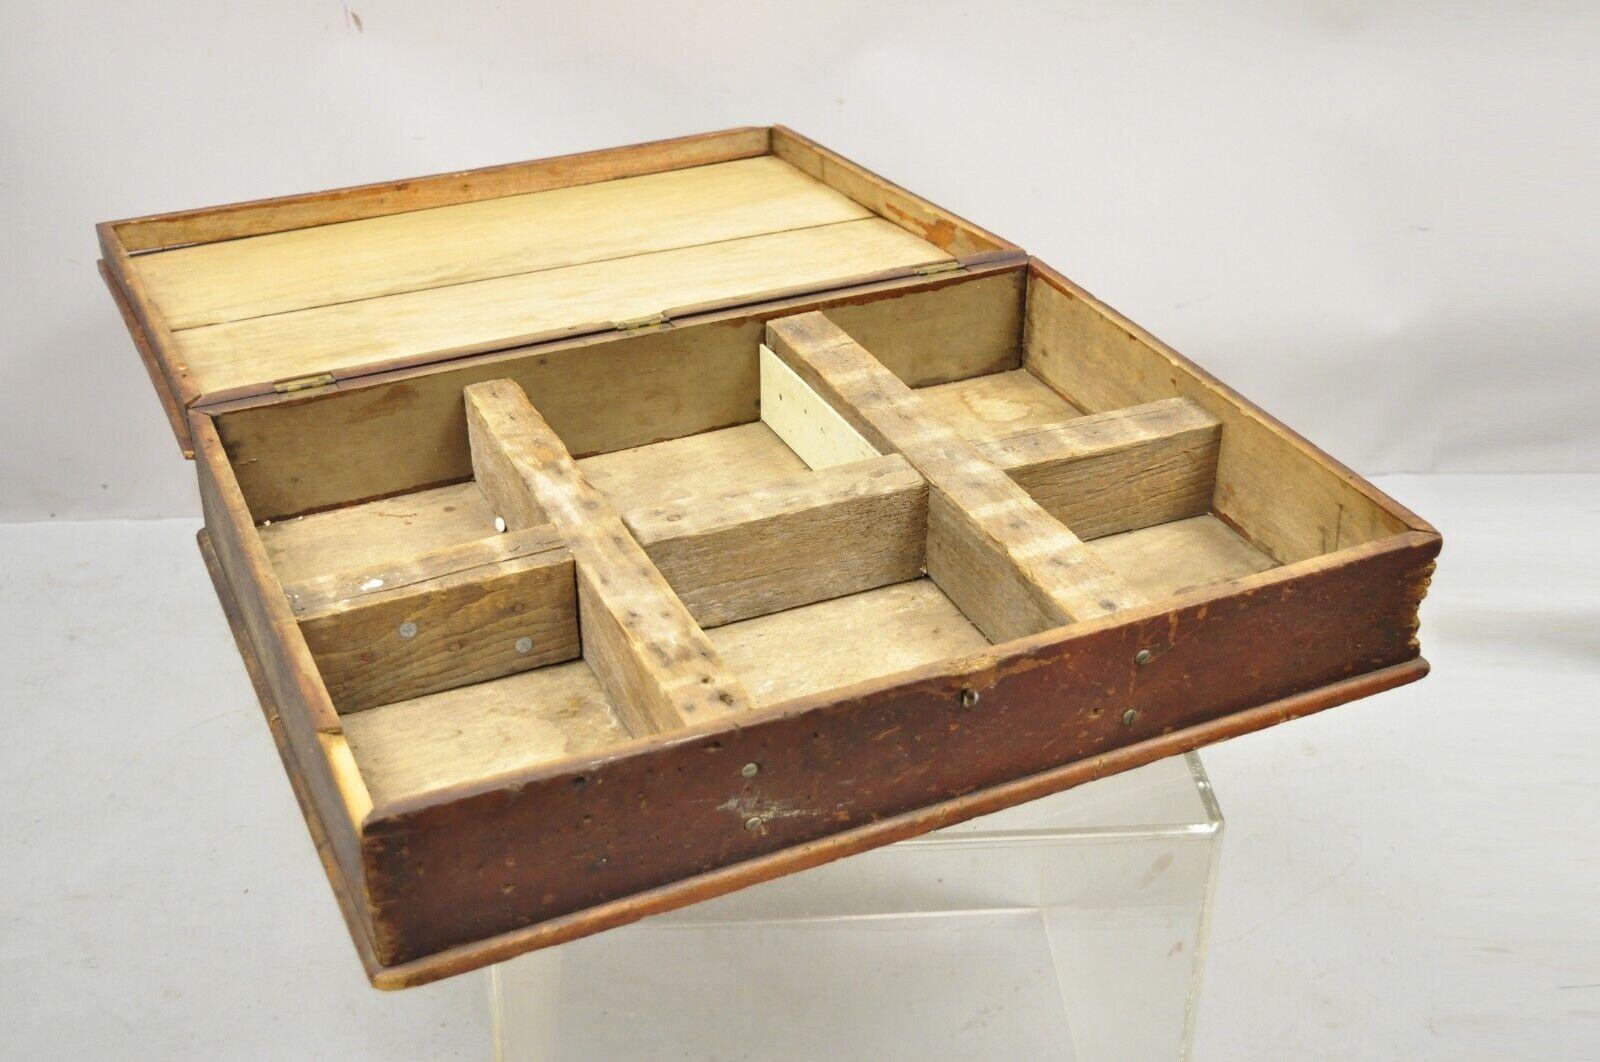 Antique 19th C American Primitive Wooden Distressed Paint Storage Tool Work Box For Sale 2